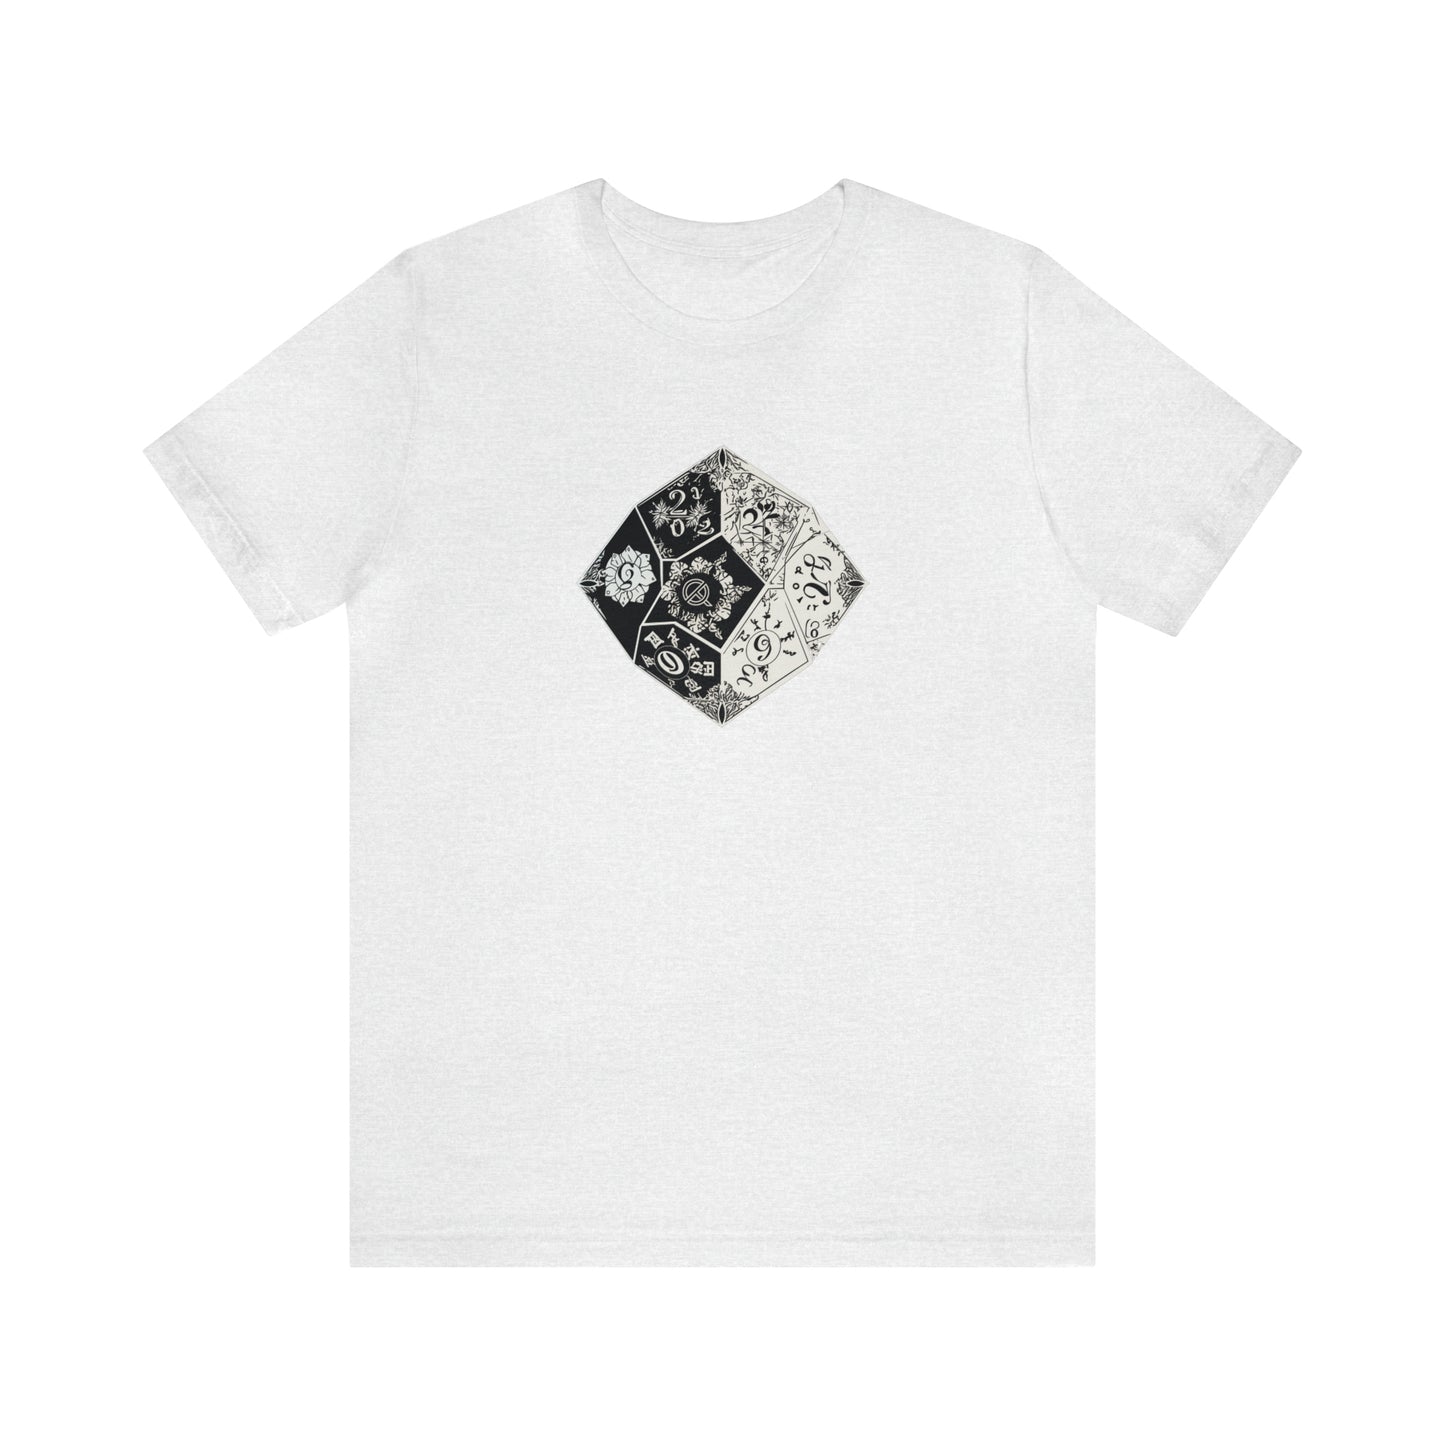 ash-quest-thread-tee-shirt-with-large-black-and-white-artistic-dice-on-center